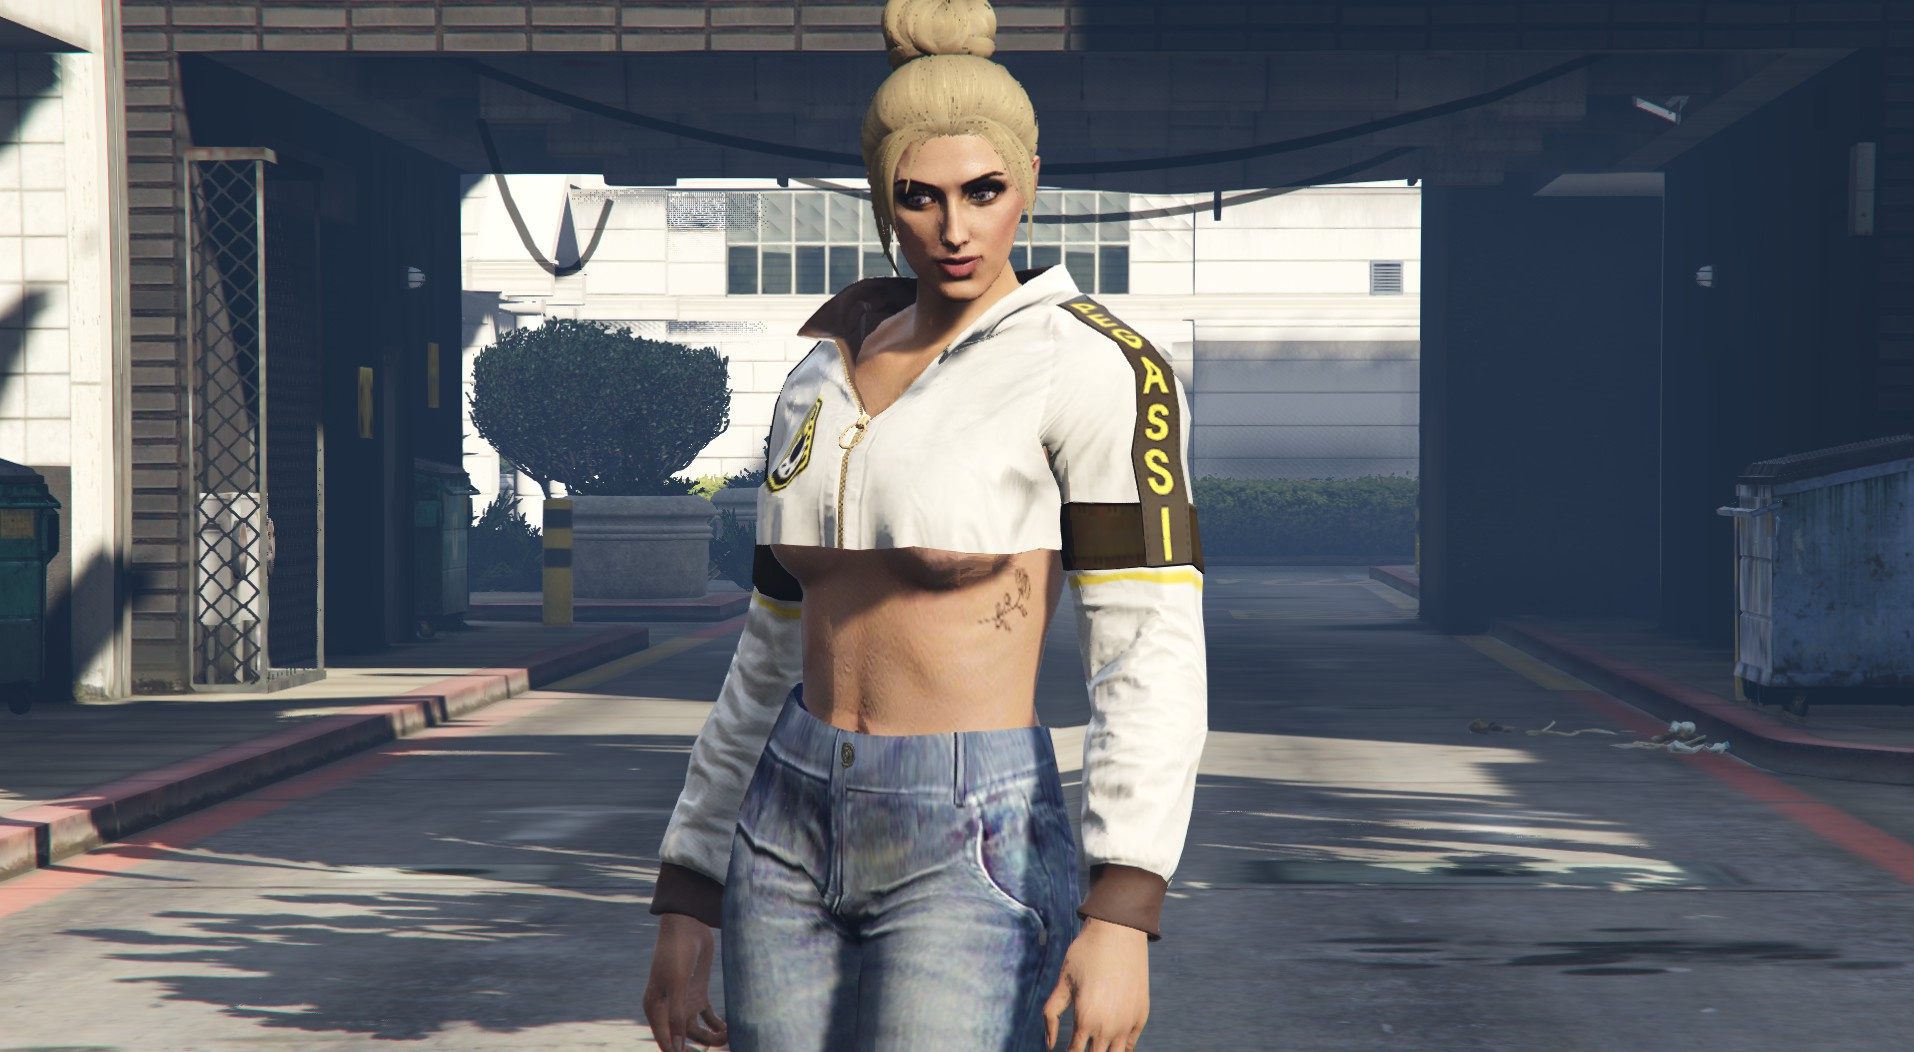 Female Gta 5 Modded Outfits.